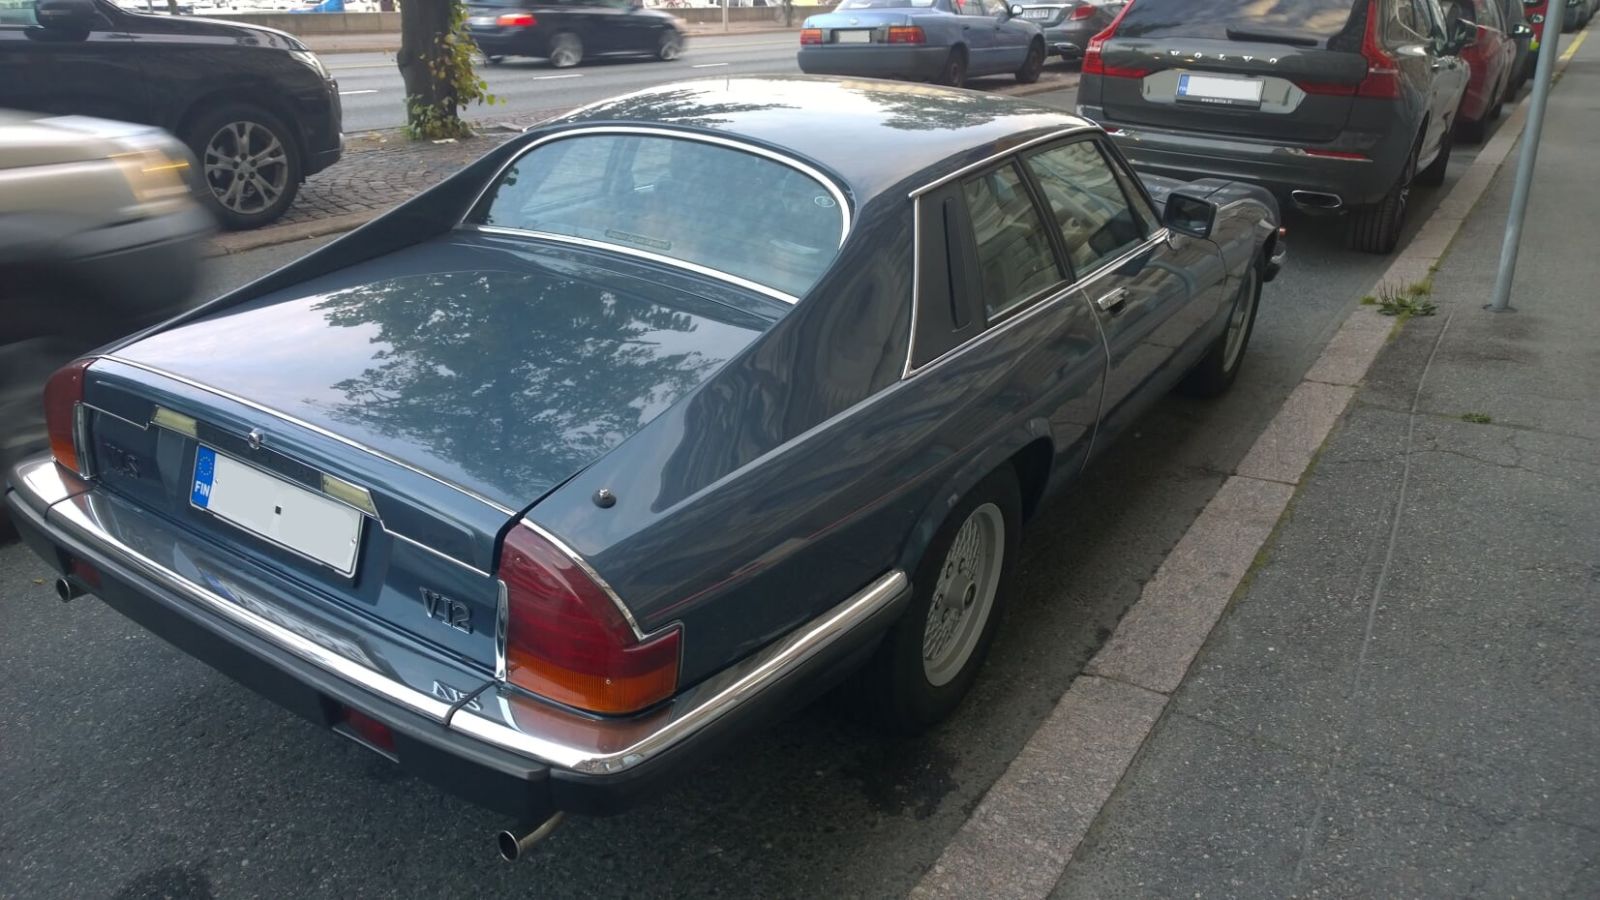 Judging by the ‘Jaguar Japan Limited’ sticker on rear window this is a Japanese import.